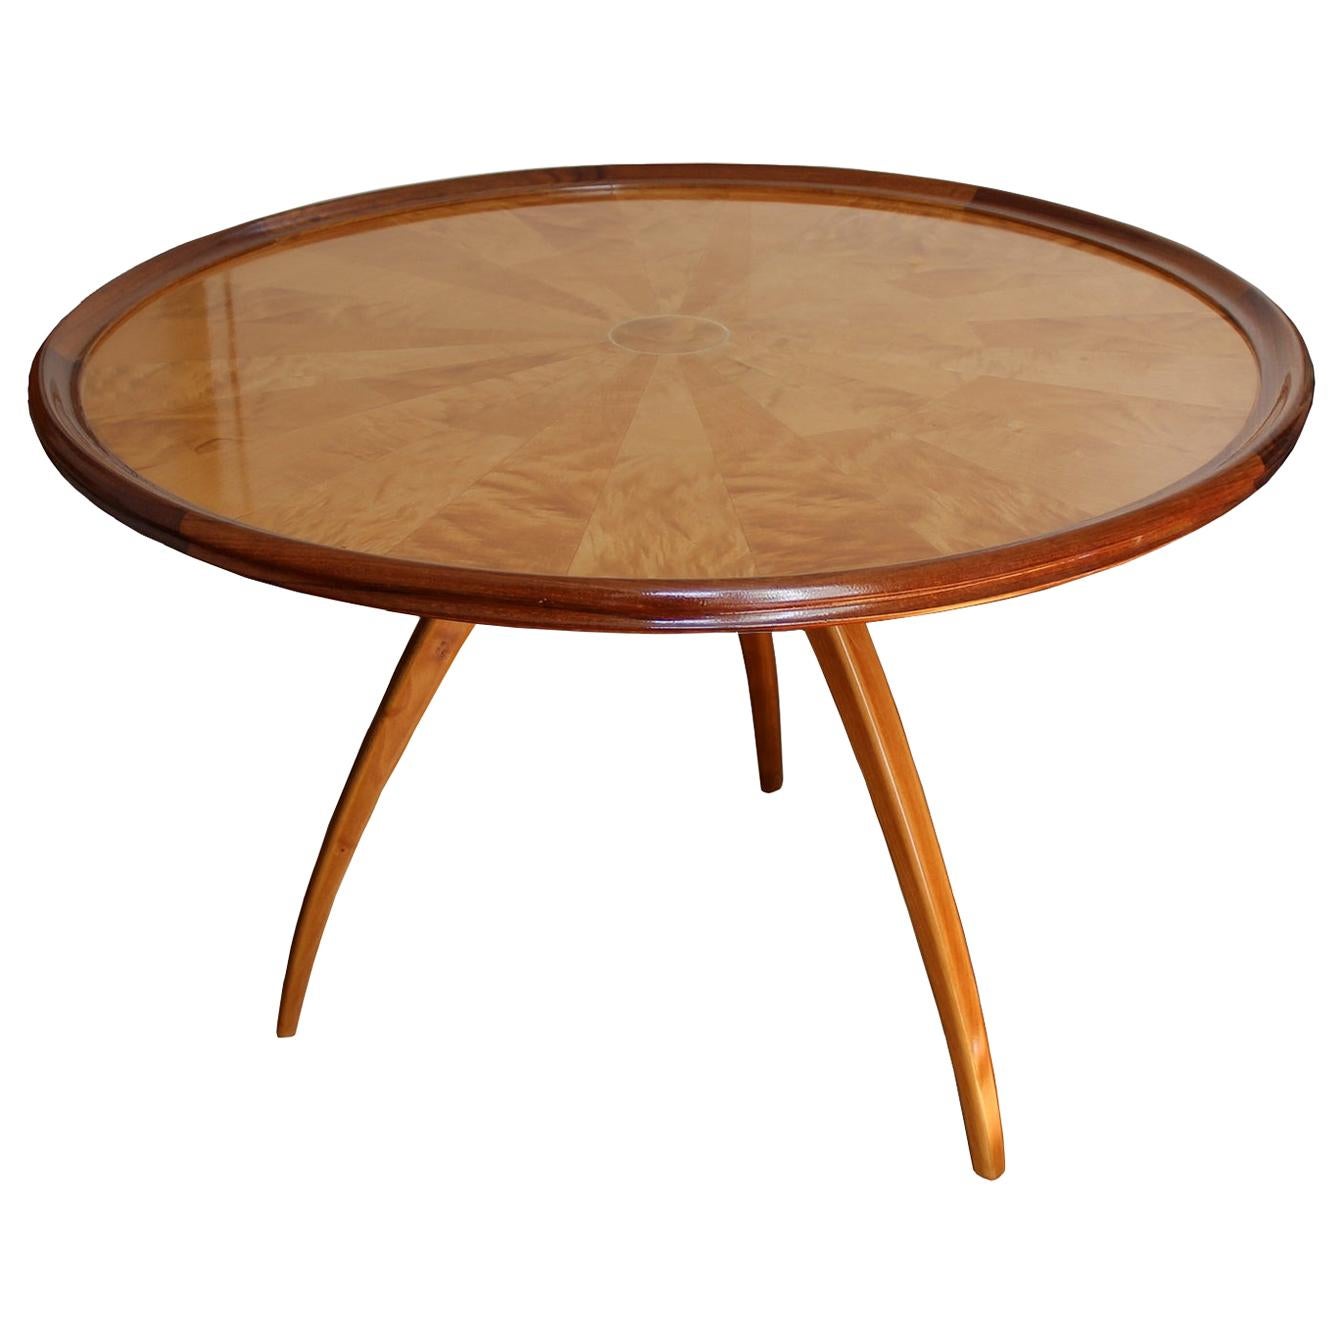 Art Deco Pedestal Table in Sycamore and Blond Mahogany, France, circa 1950 For Sale